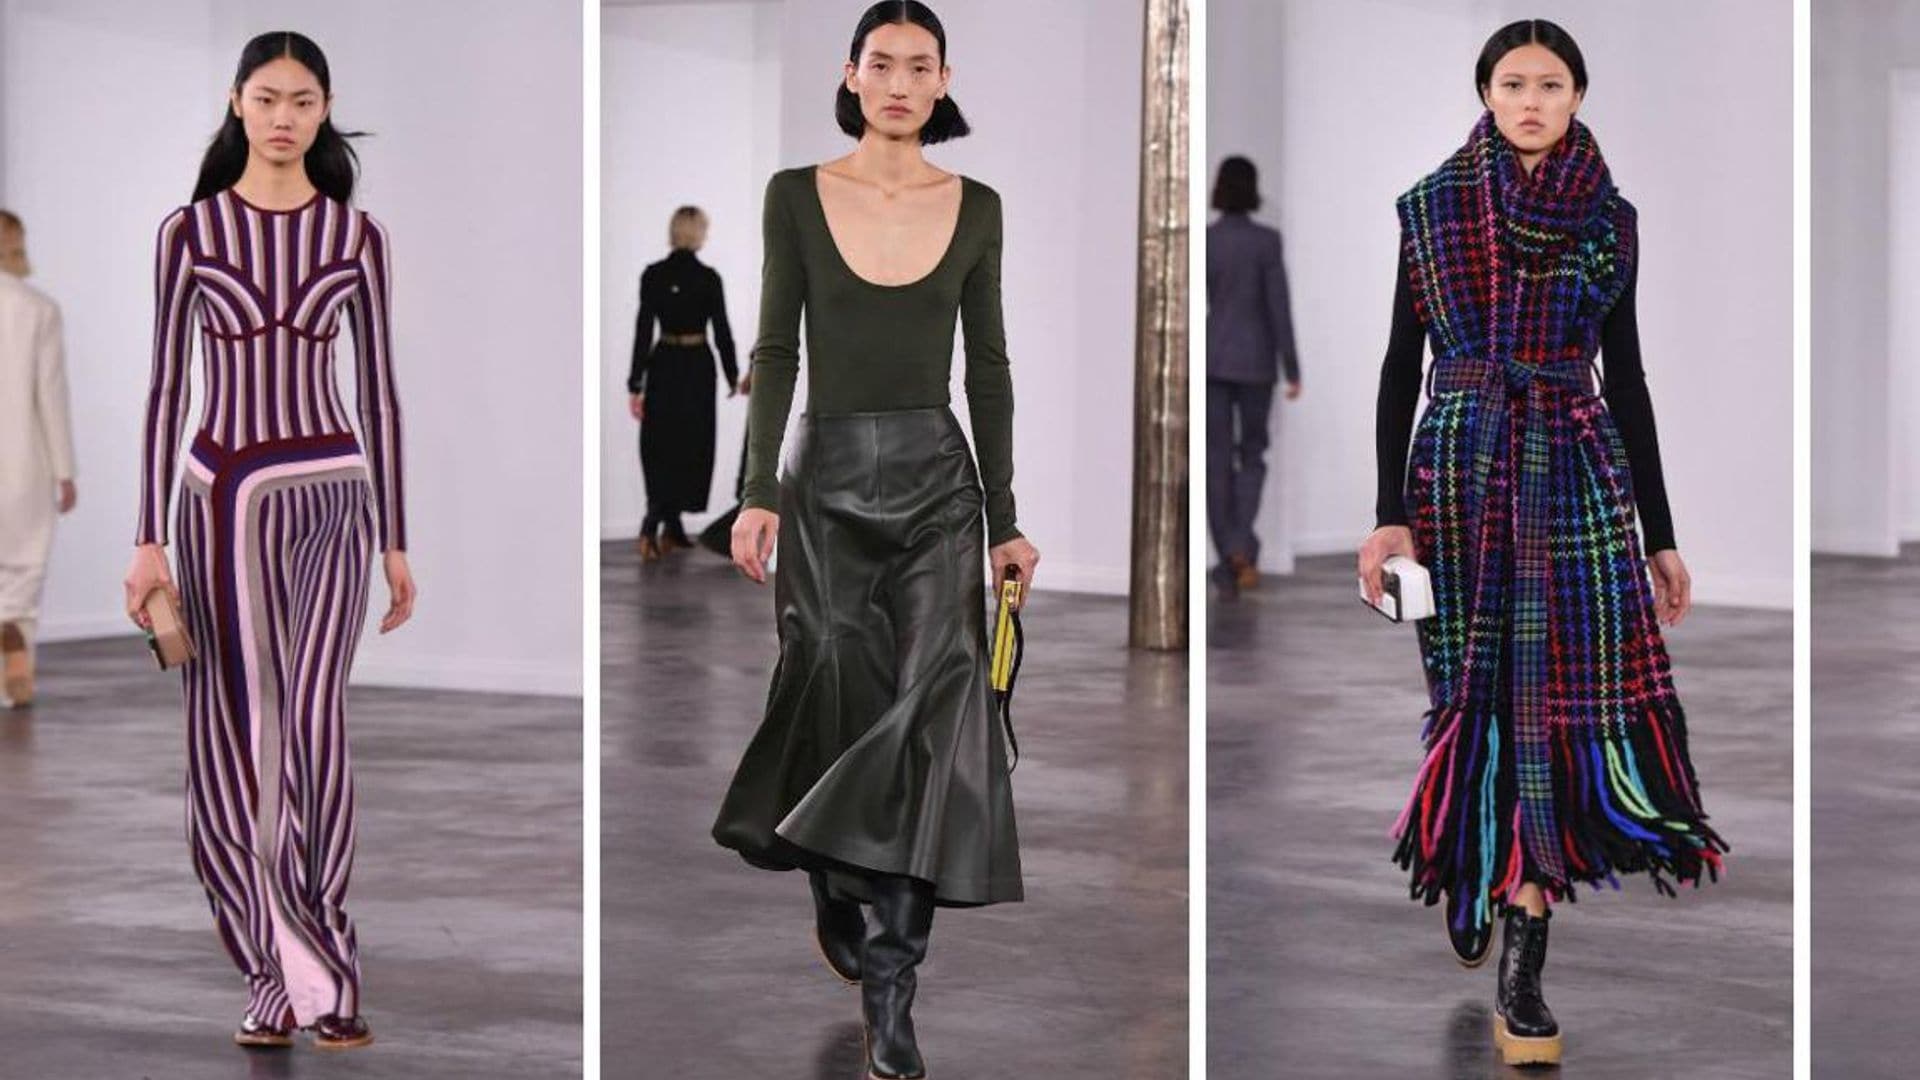 A $67,000 skirt and 9 more luxe looks by Latinx designer Gabriela Hearst